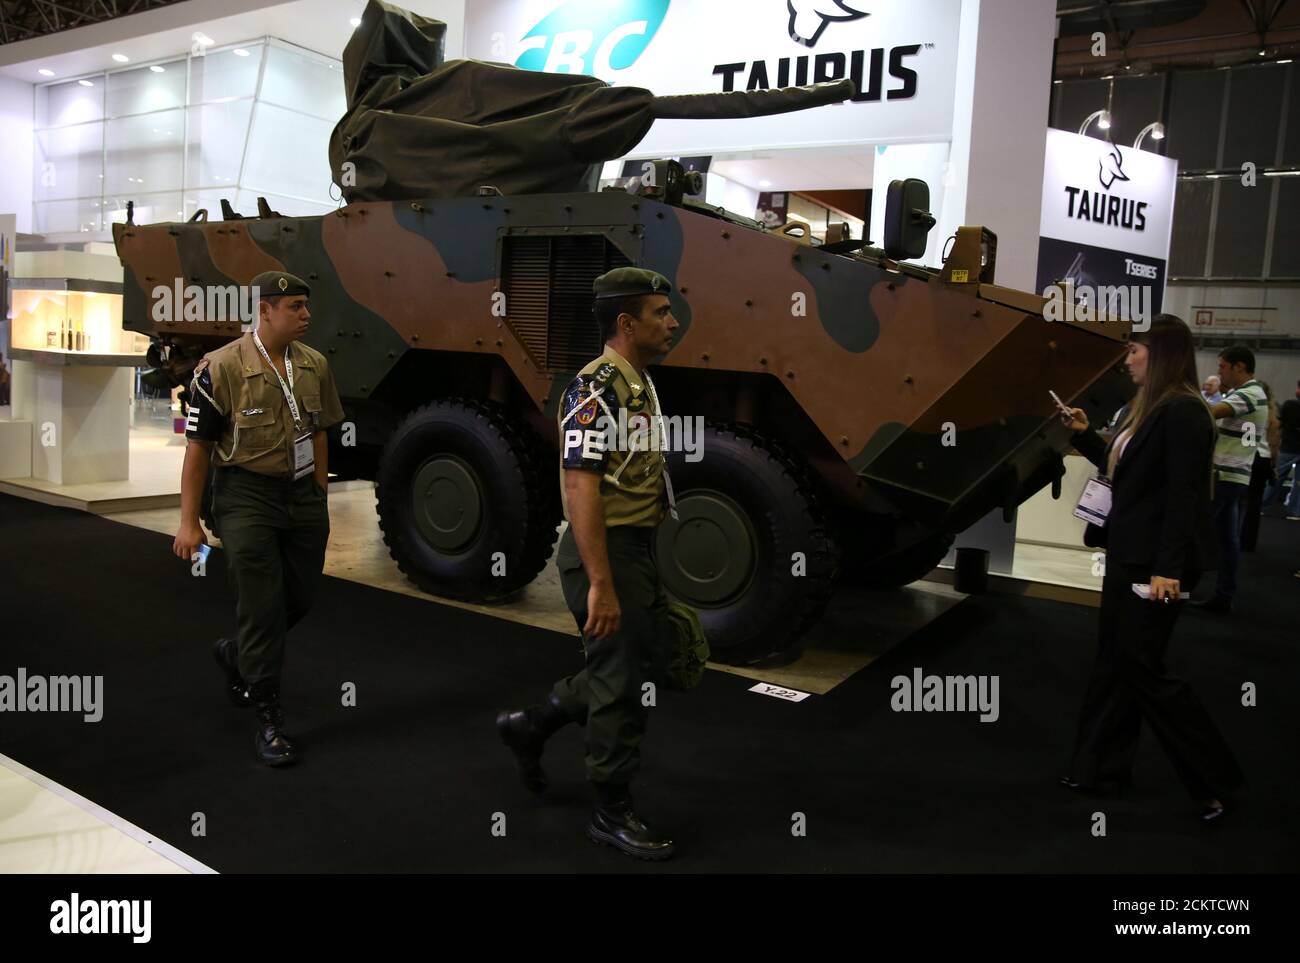 A tank is displayed at LAAD, the biggest military industry expo in Latin America, in Rio de Janeiro, Brazil April 4, 2017. REUTERS/Pilar Olivares Stock Photo